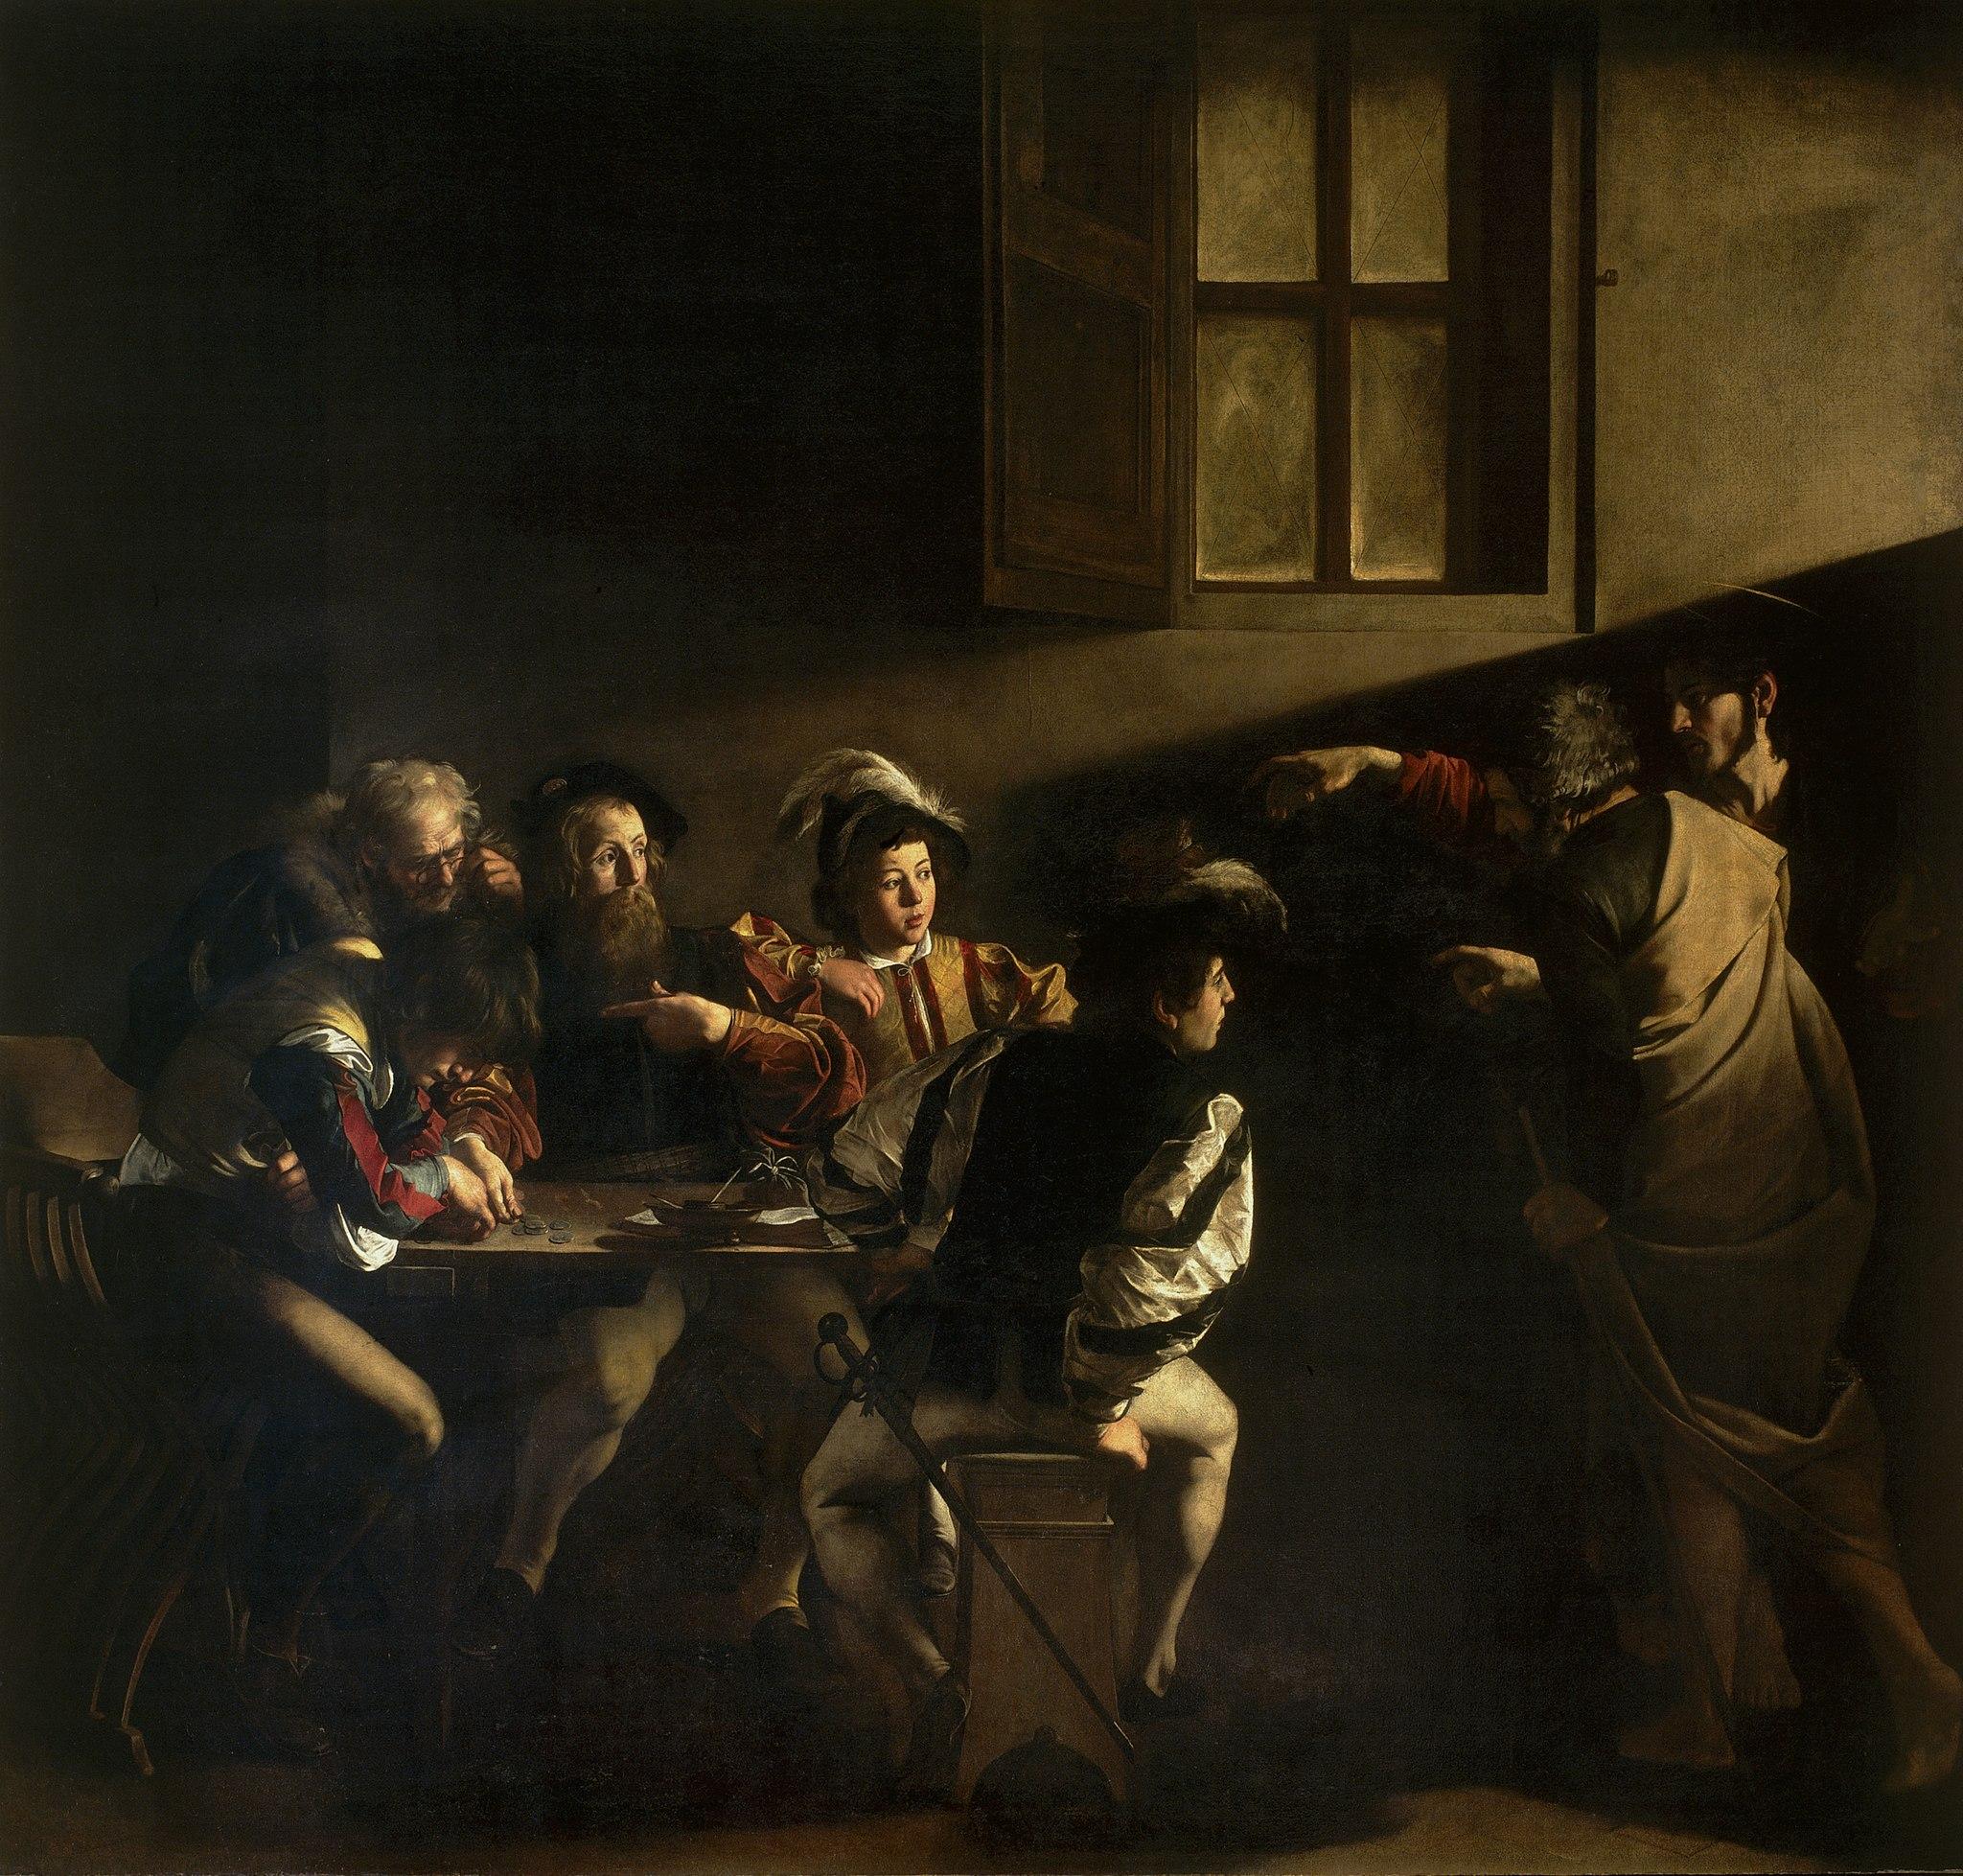 The Calling of Saint Matthew (1599–1600), Contarelli Chapel, San Luigi dei Francesi, Rome. Without recourse to flying angels, parting clouds or other artifice, Caravaggio portrays the instant conversion of St Matthew, the moment on which his destiny will turn, by means of a beam of light and the pointing finger of Jesus.